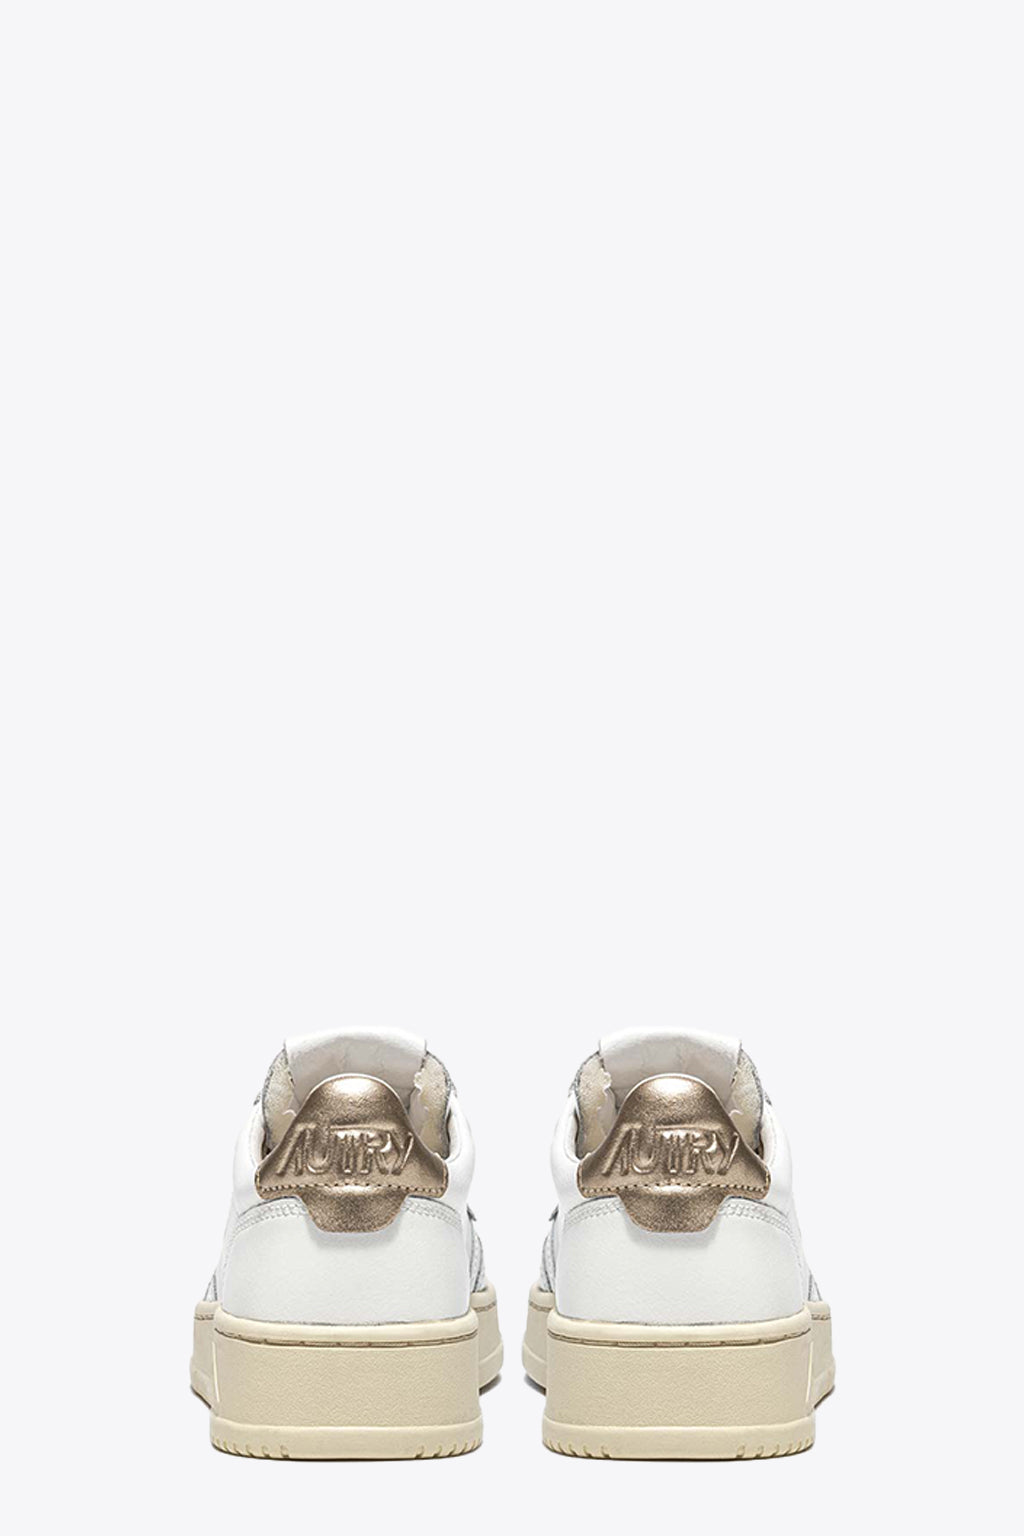 alt-image__White-leather-low-sneaker-with-gold-back-tab---Medalist